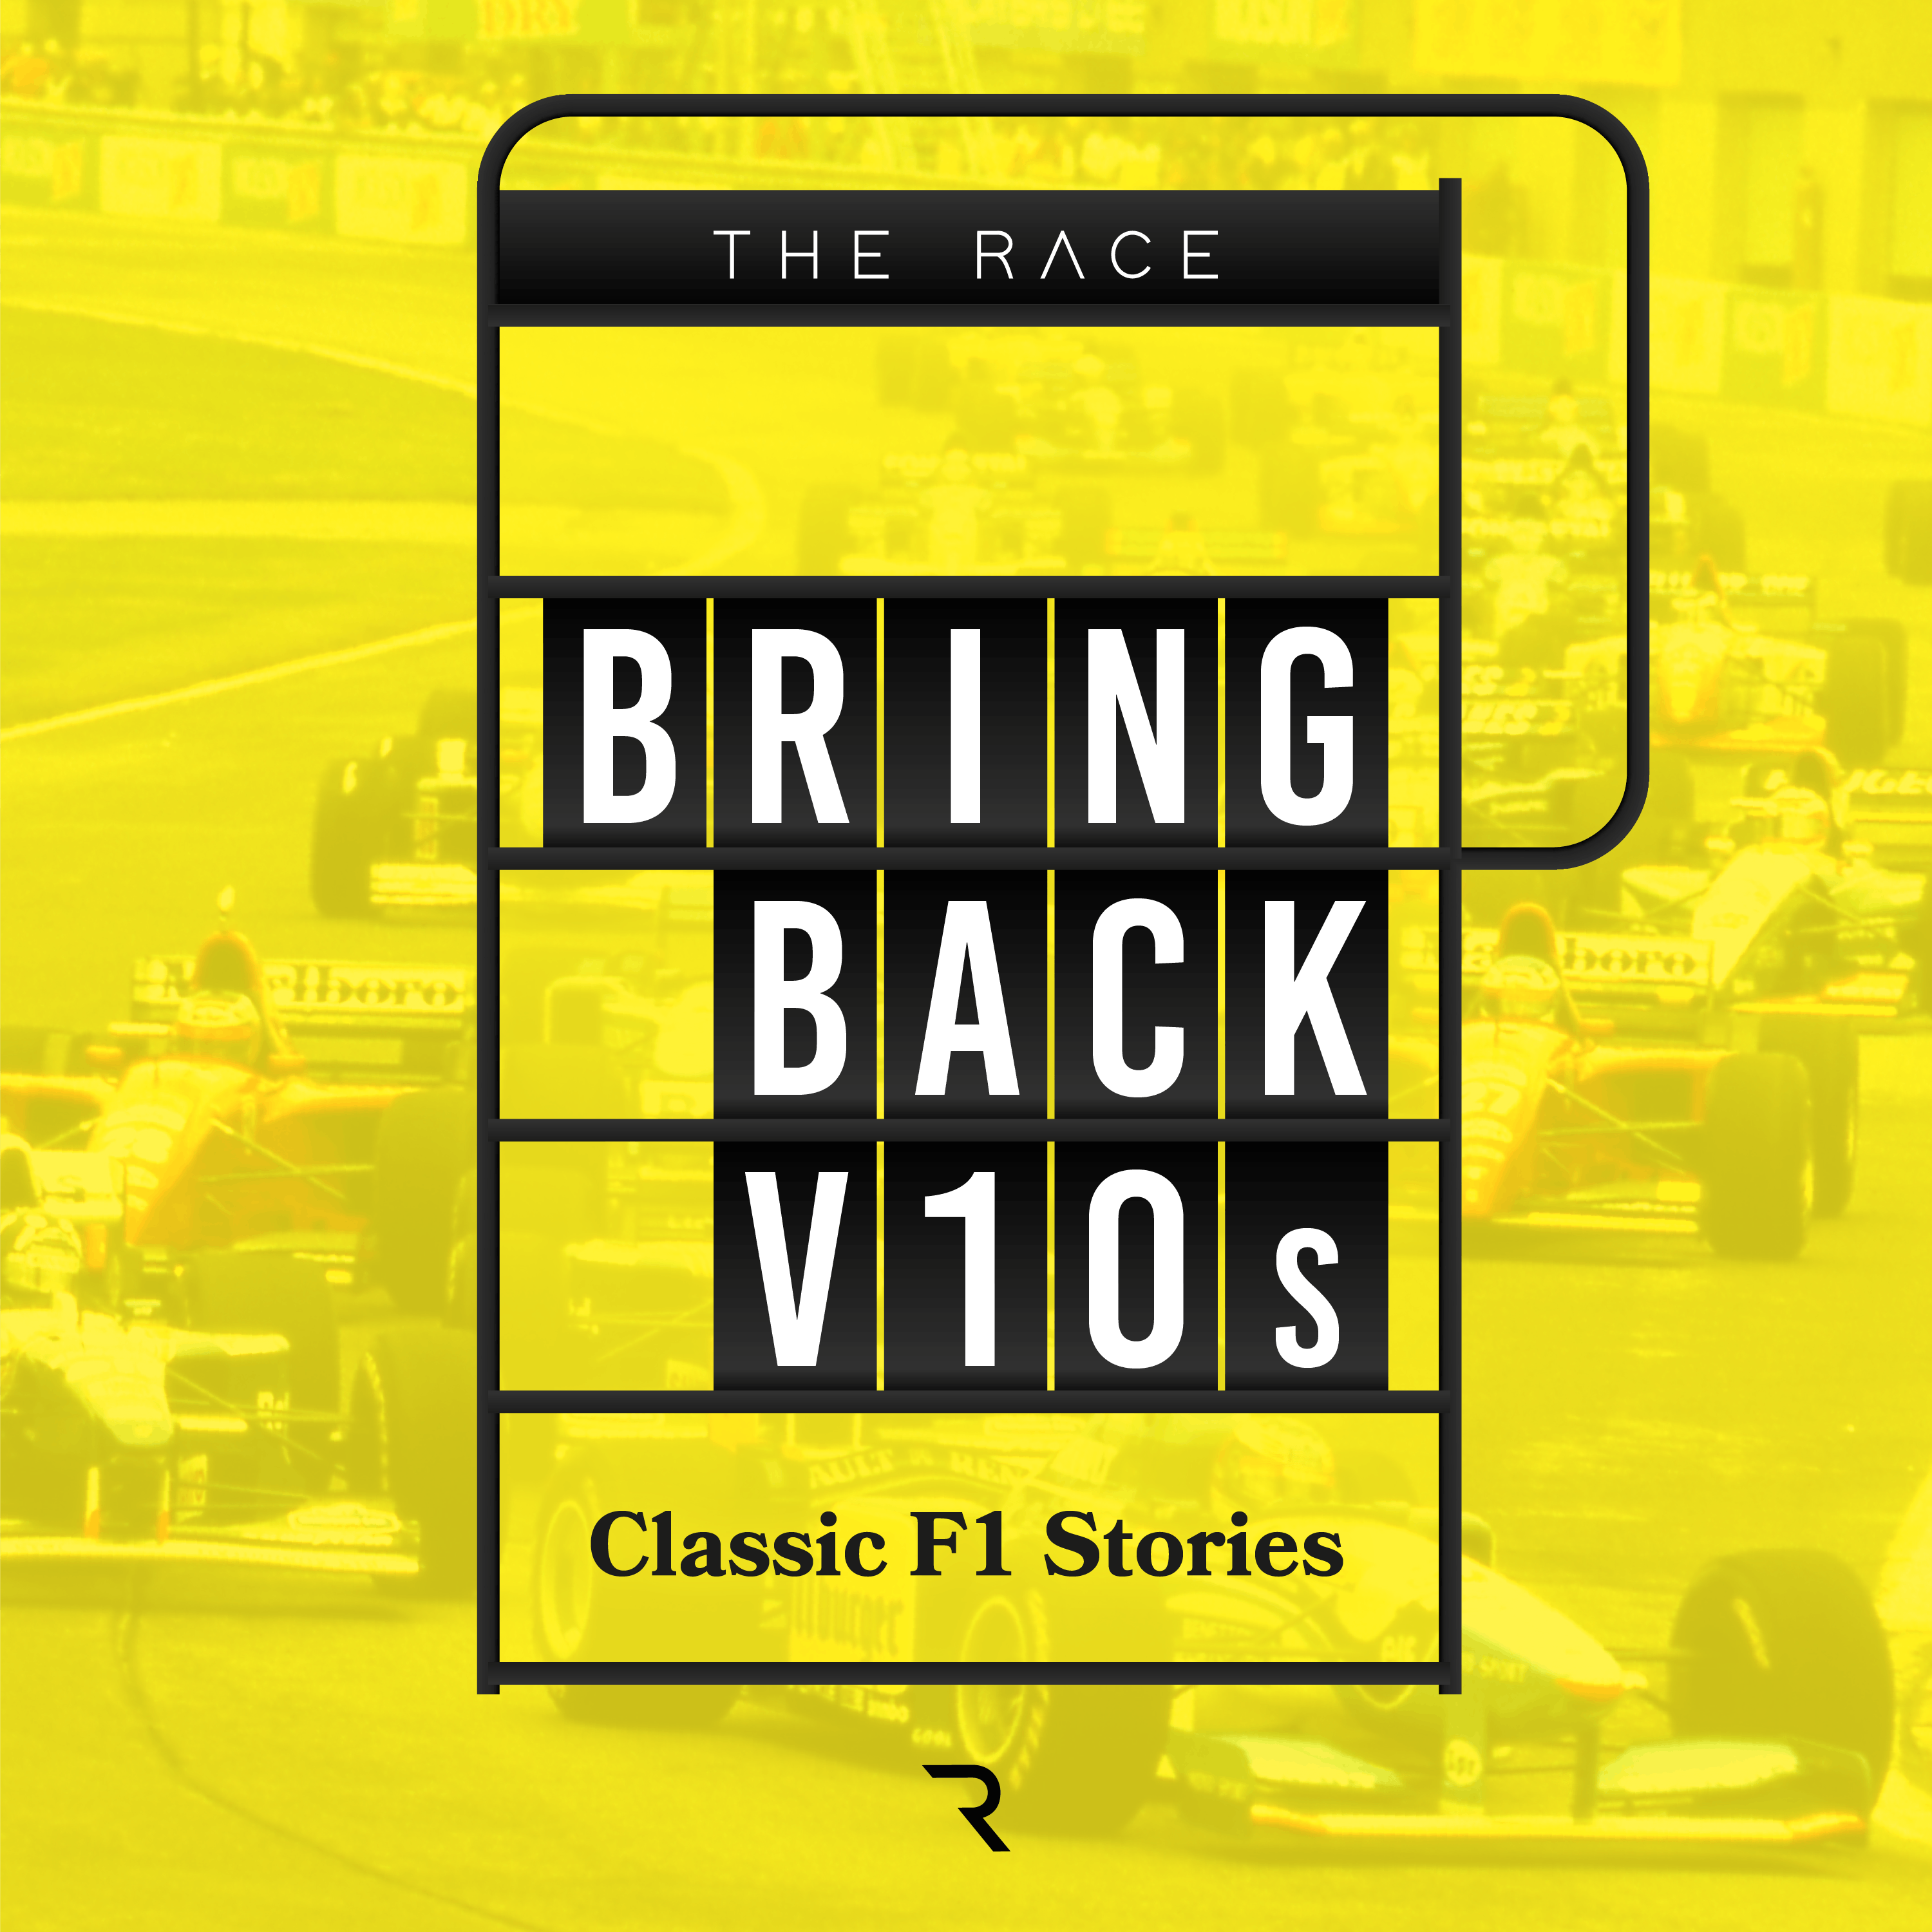 COMING SOON: Series 6 of Bring Back V10s